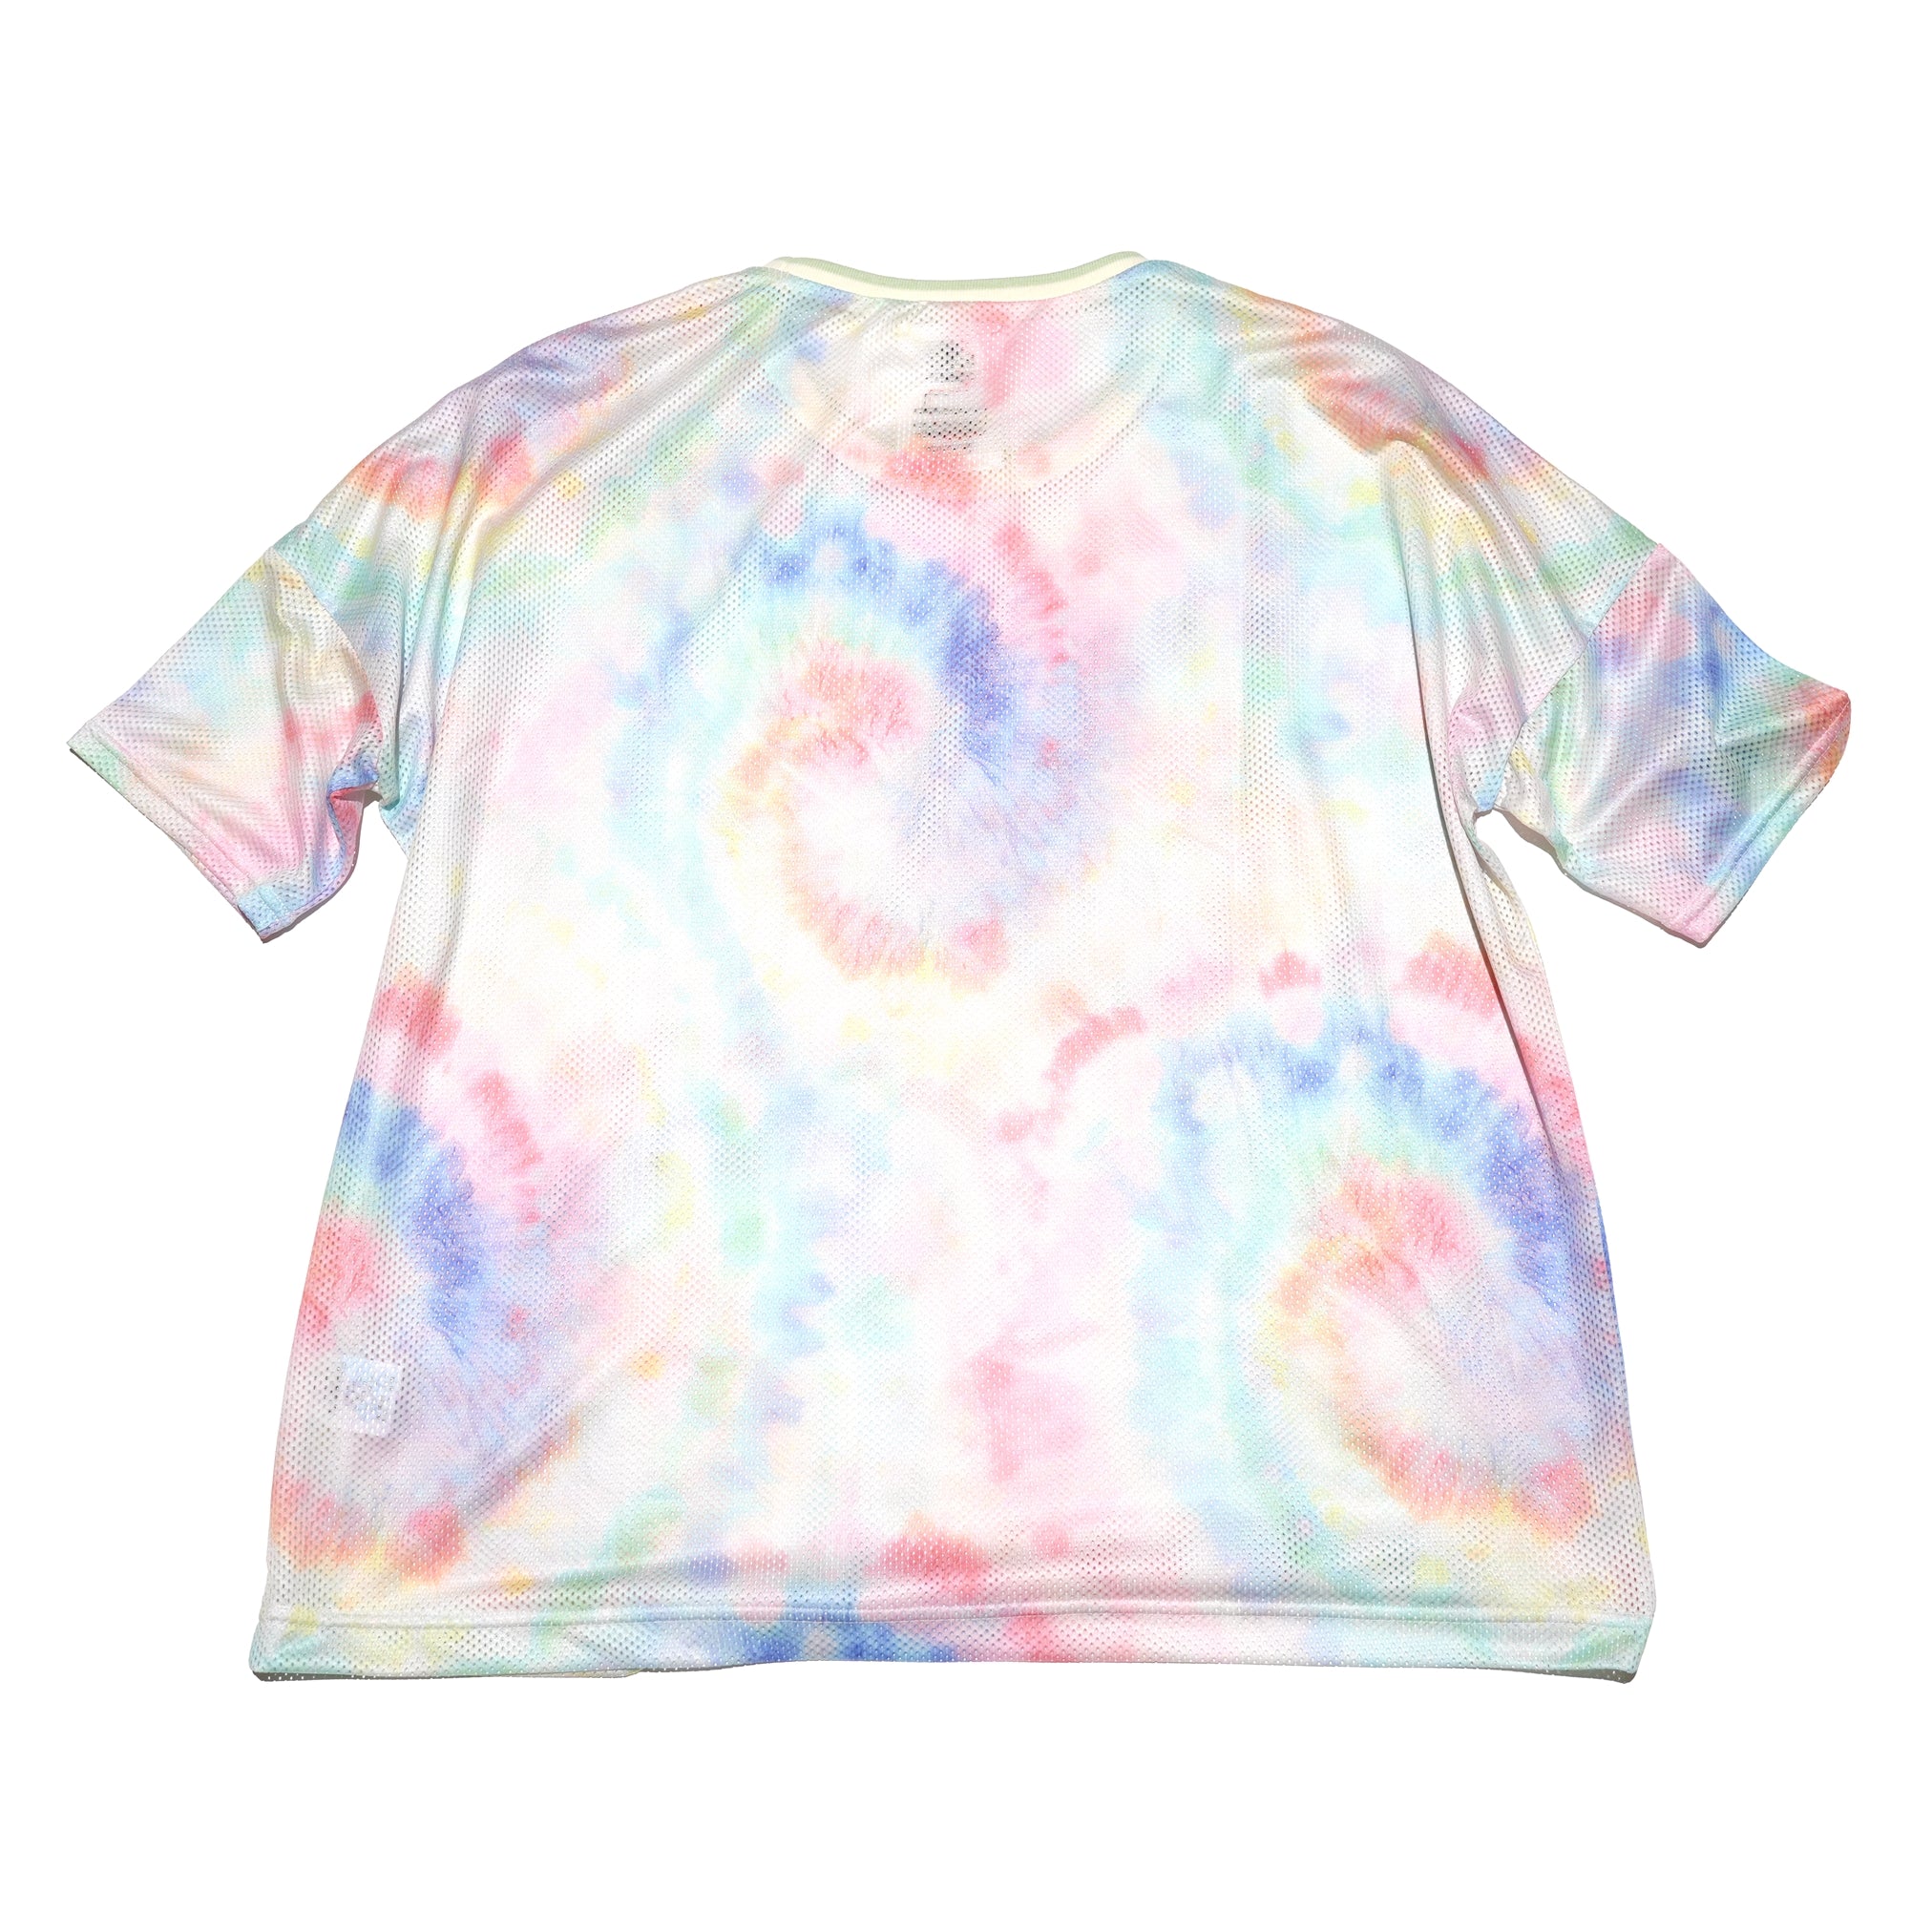 No:SF24SS-19A | Name:Festival Summer Mesh Tee | Color:Tie-Dye【STOF_ストフ】